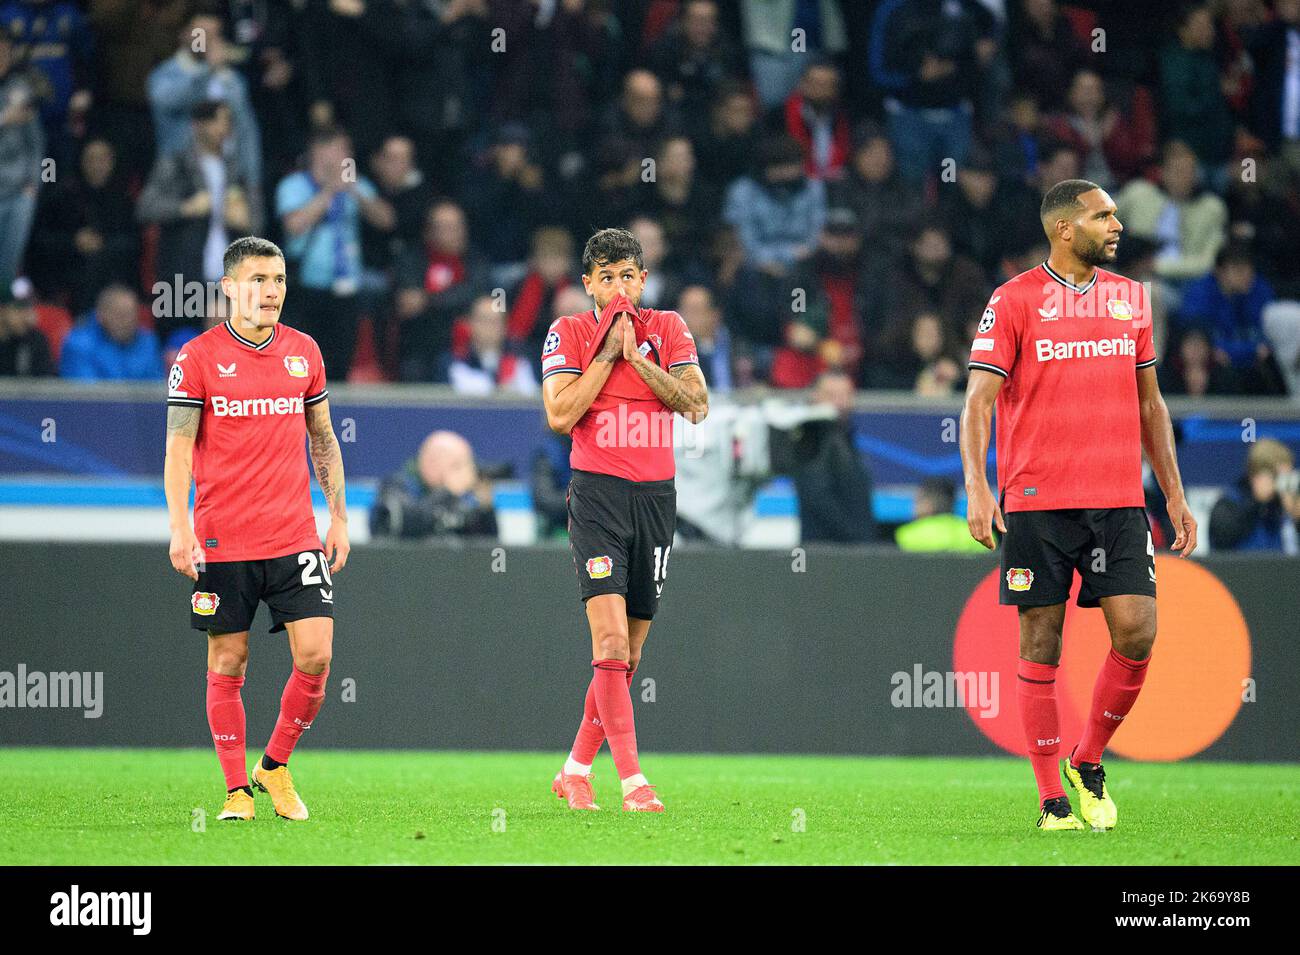 left to right Charles ARANGUIZ (LEV), Kerem DEMIRBAY (LEV), Jonathan TAH (LEV) disappointed Soccer Champions League, preliminary round 4th matchday, Bayer 04 Leverkusen (LEV) - FC Porto, on October 12th, 2022 in Leverkusen/ Germany. © Stock Photo